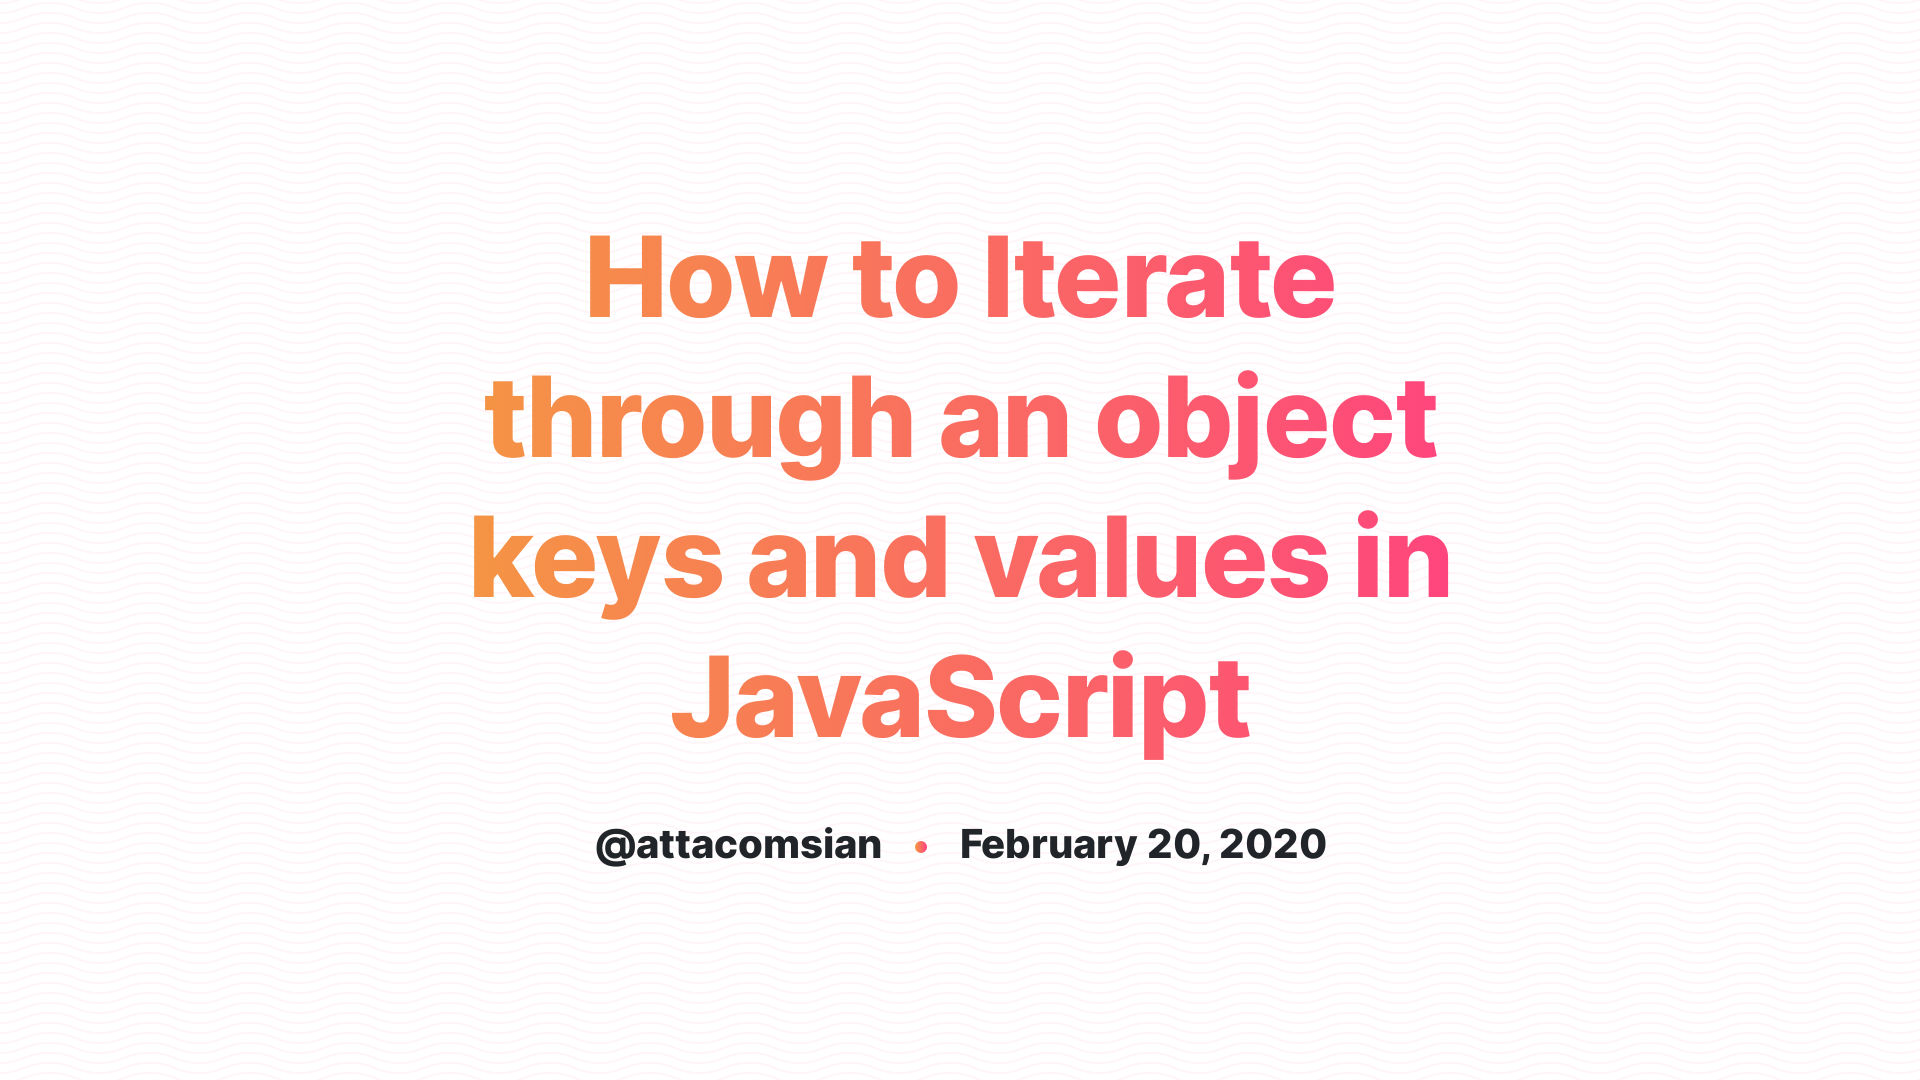 How to Iterate through an object keys and values in JavaScript